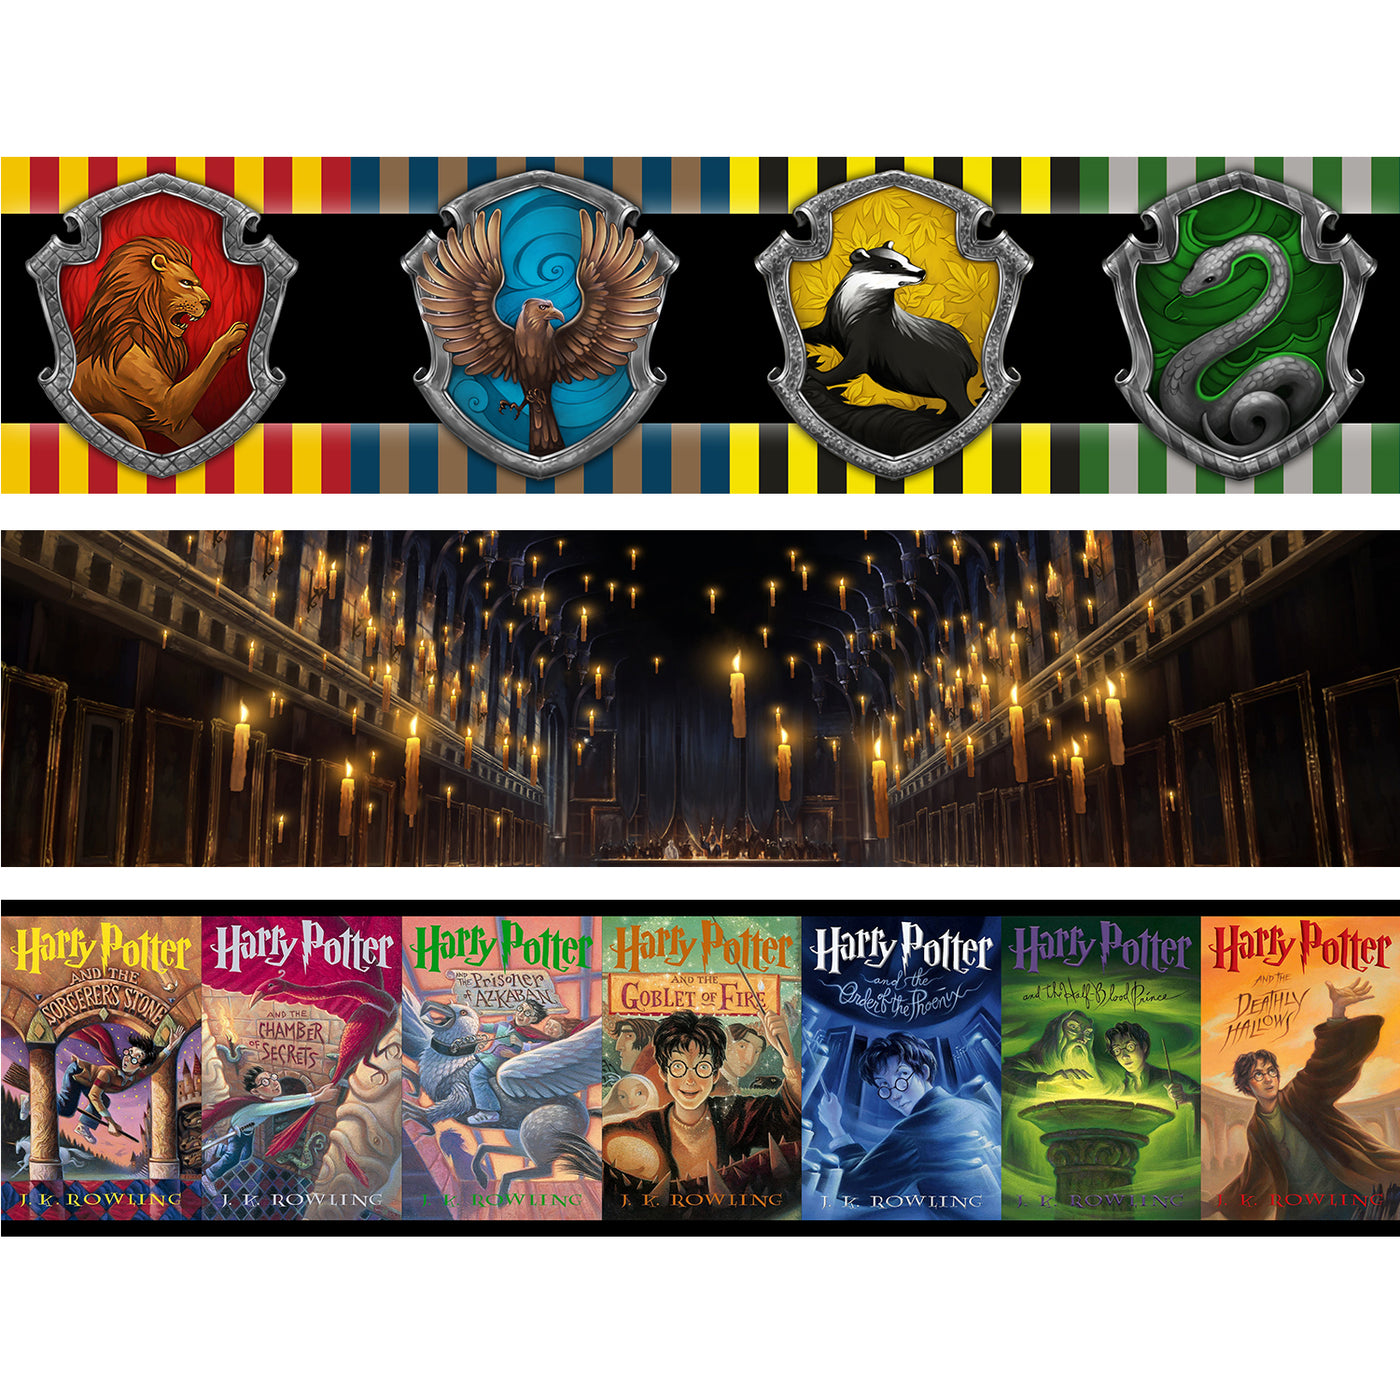 HARRY POTTER - Backdrop Inserts for CLASSIC Display Geek Shelves (Limited Edition) - Display Geek